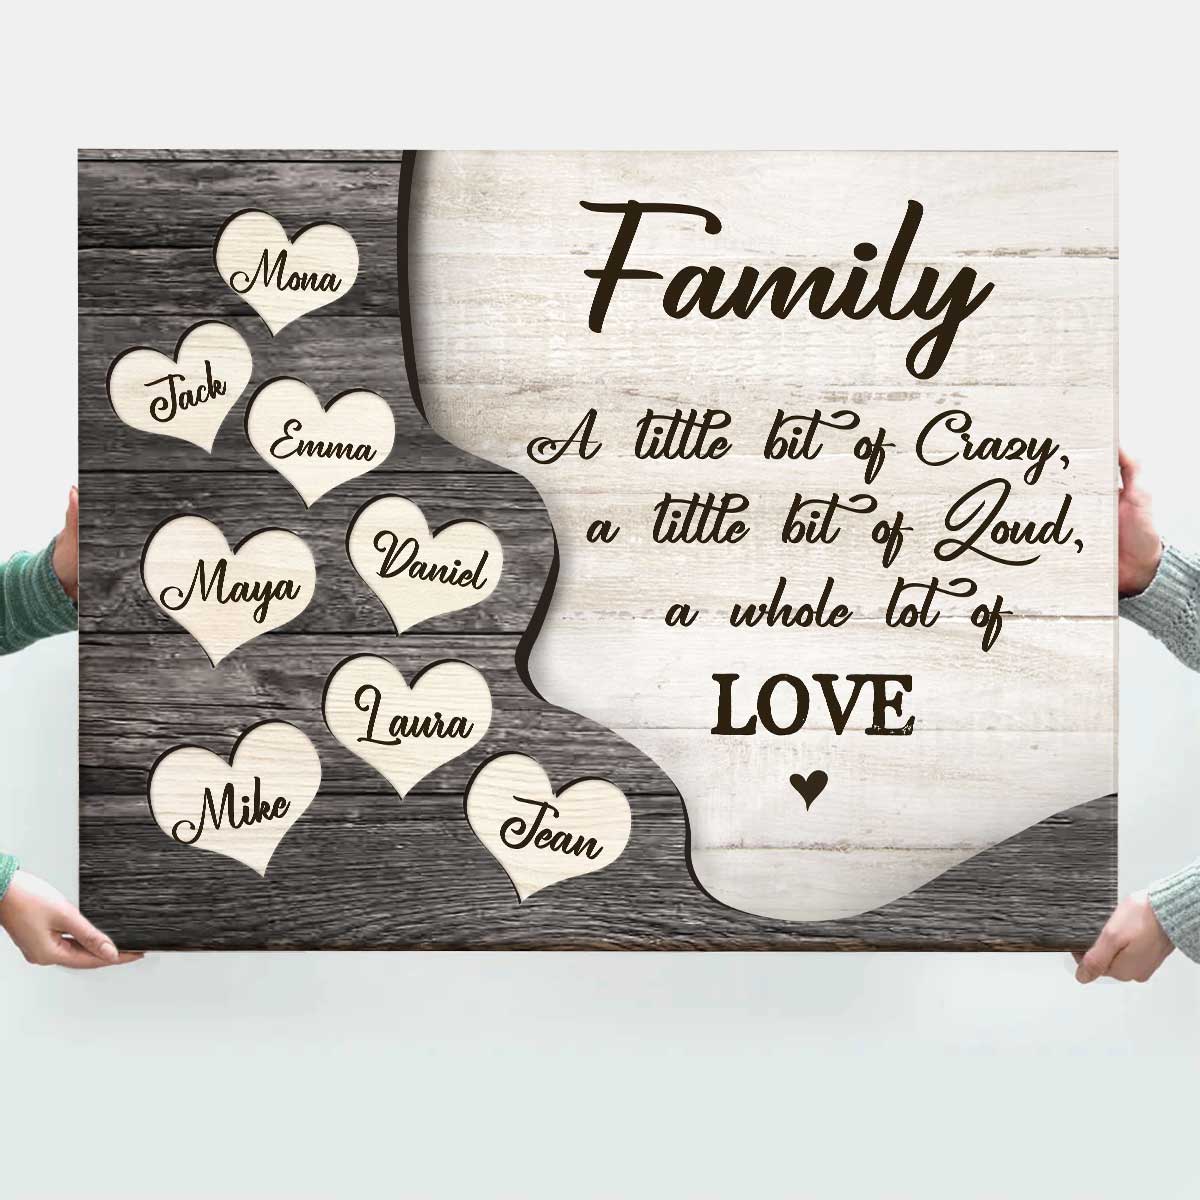 https://benicee.com/wp-content/uploads/2022/09/2022-Family-Christmas-Gifts-Personalized-Family-Name-Sign-Gift-for-Parents-Christmas-Gift-for-Mom-and-Dad.jpg